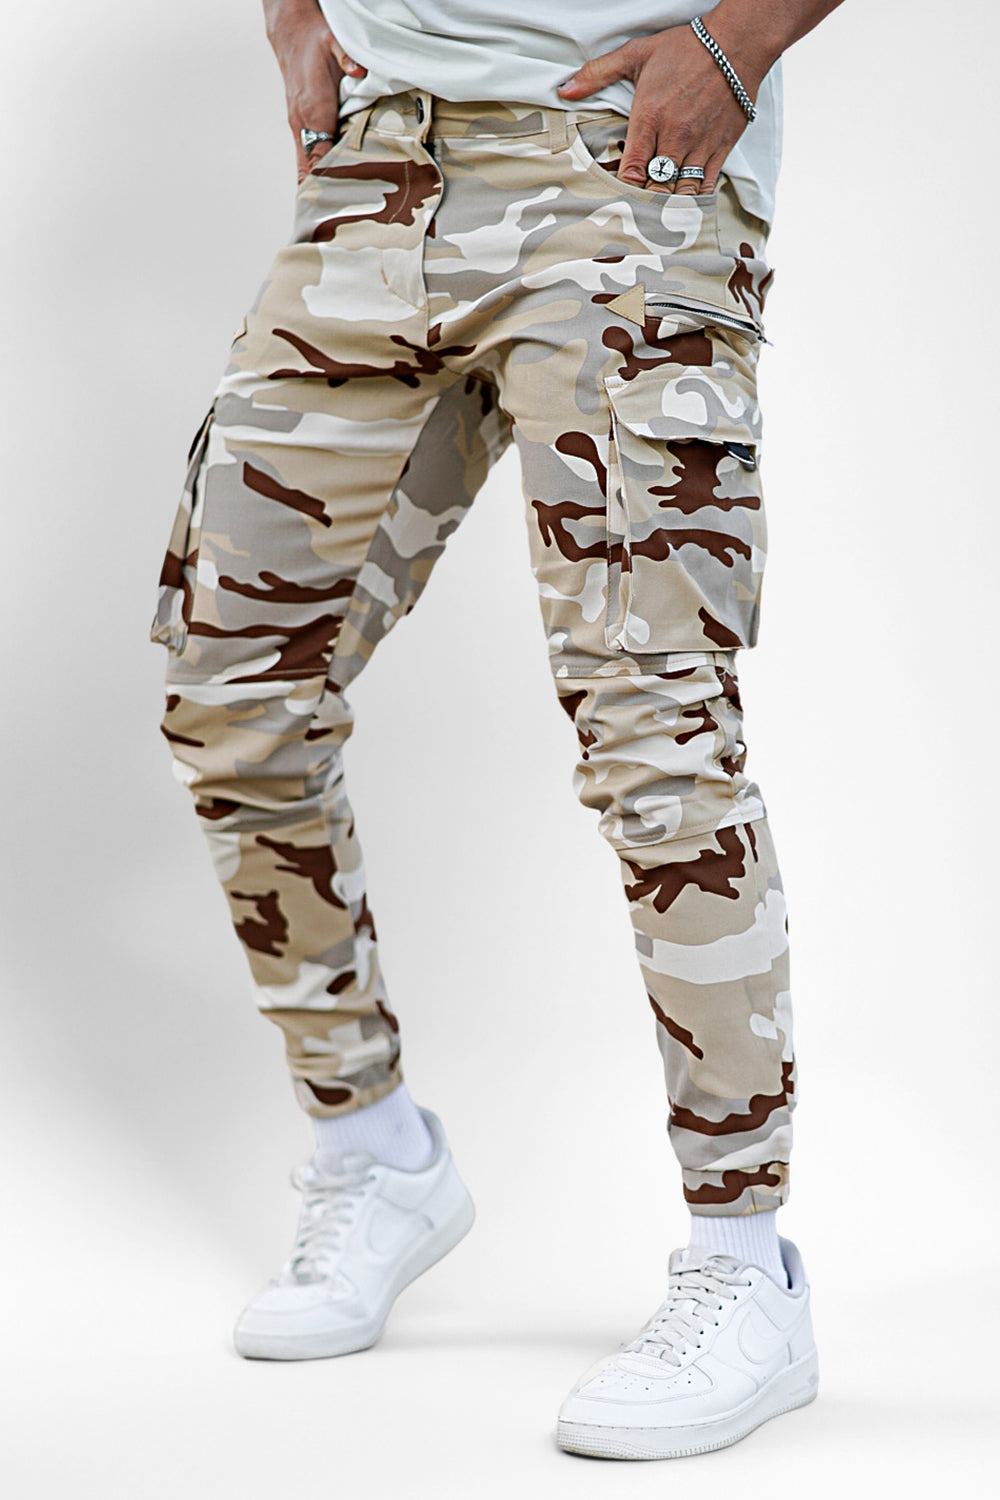 Men's Camouflage Cargo Pants - Suit For Hiking